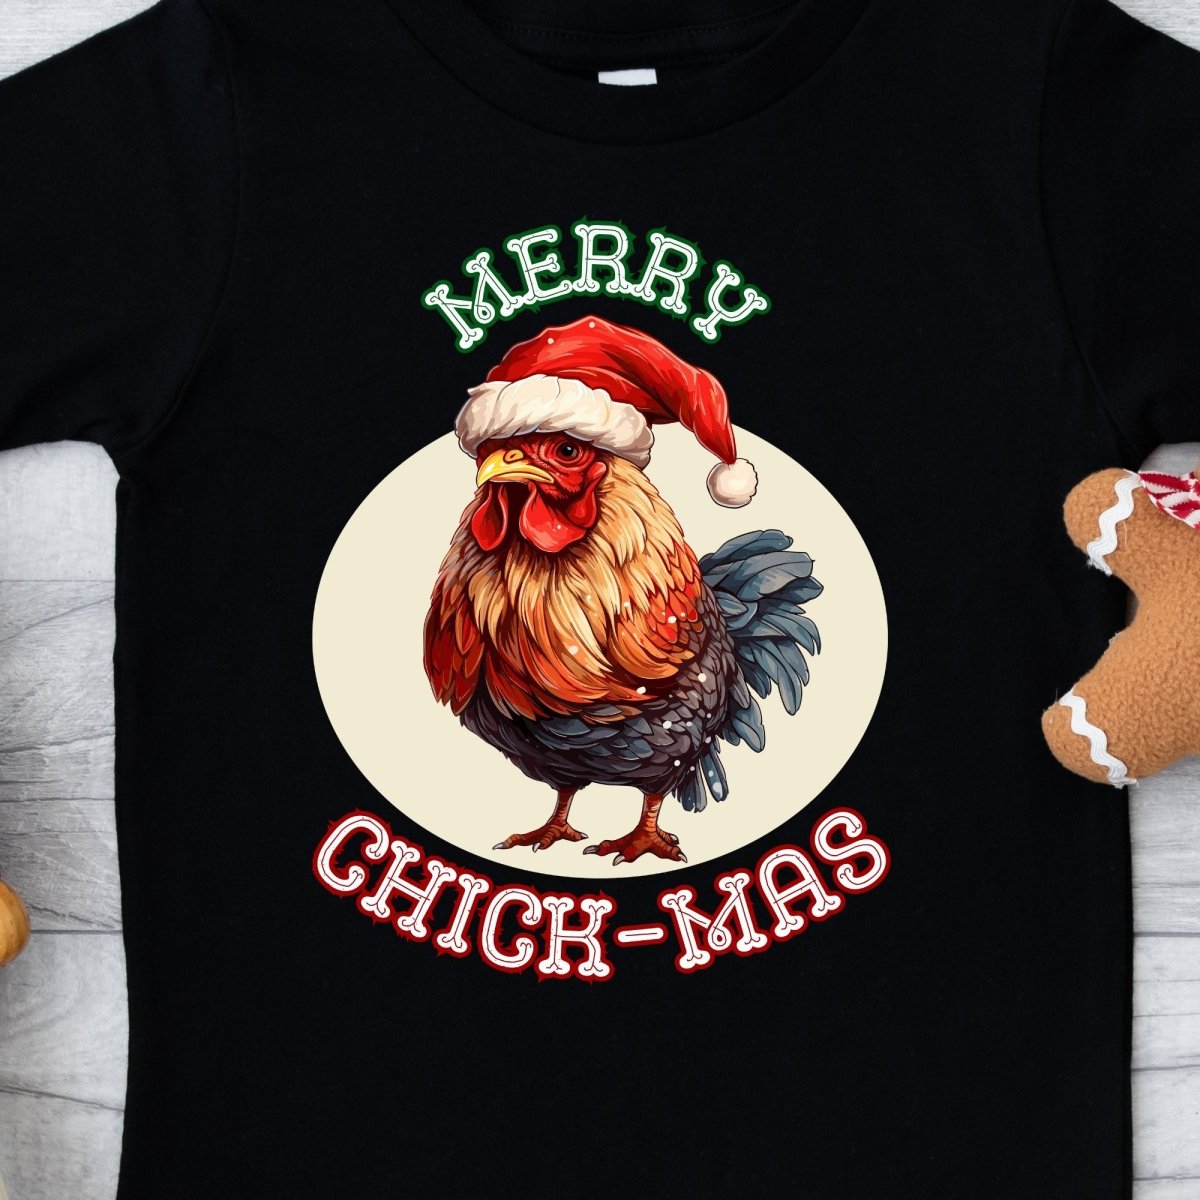 Christmas Chicken T-Shirt - High Quality Festive Children T-Shirt, Gift for Chicken Lovers, Funny Farm Animal Toddler Xmas Shirt - Everything Pixel